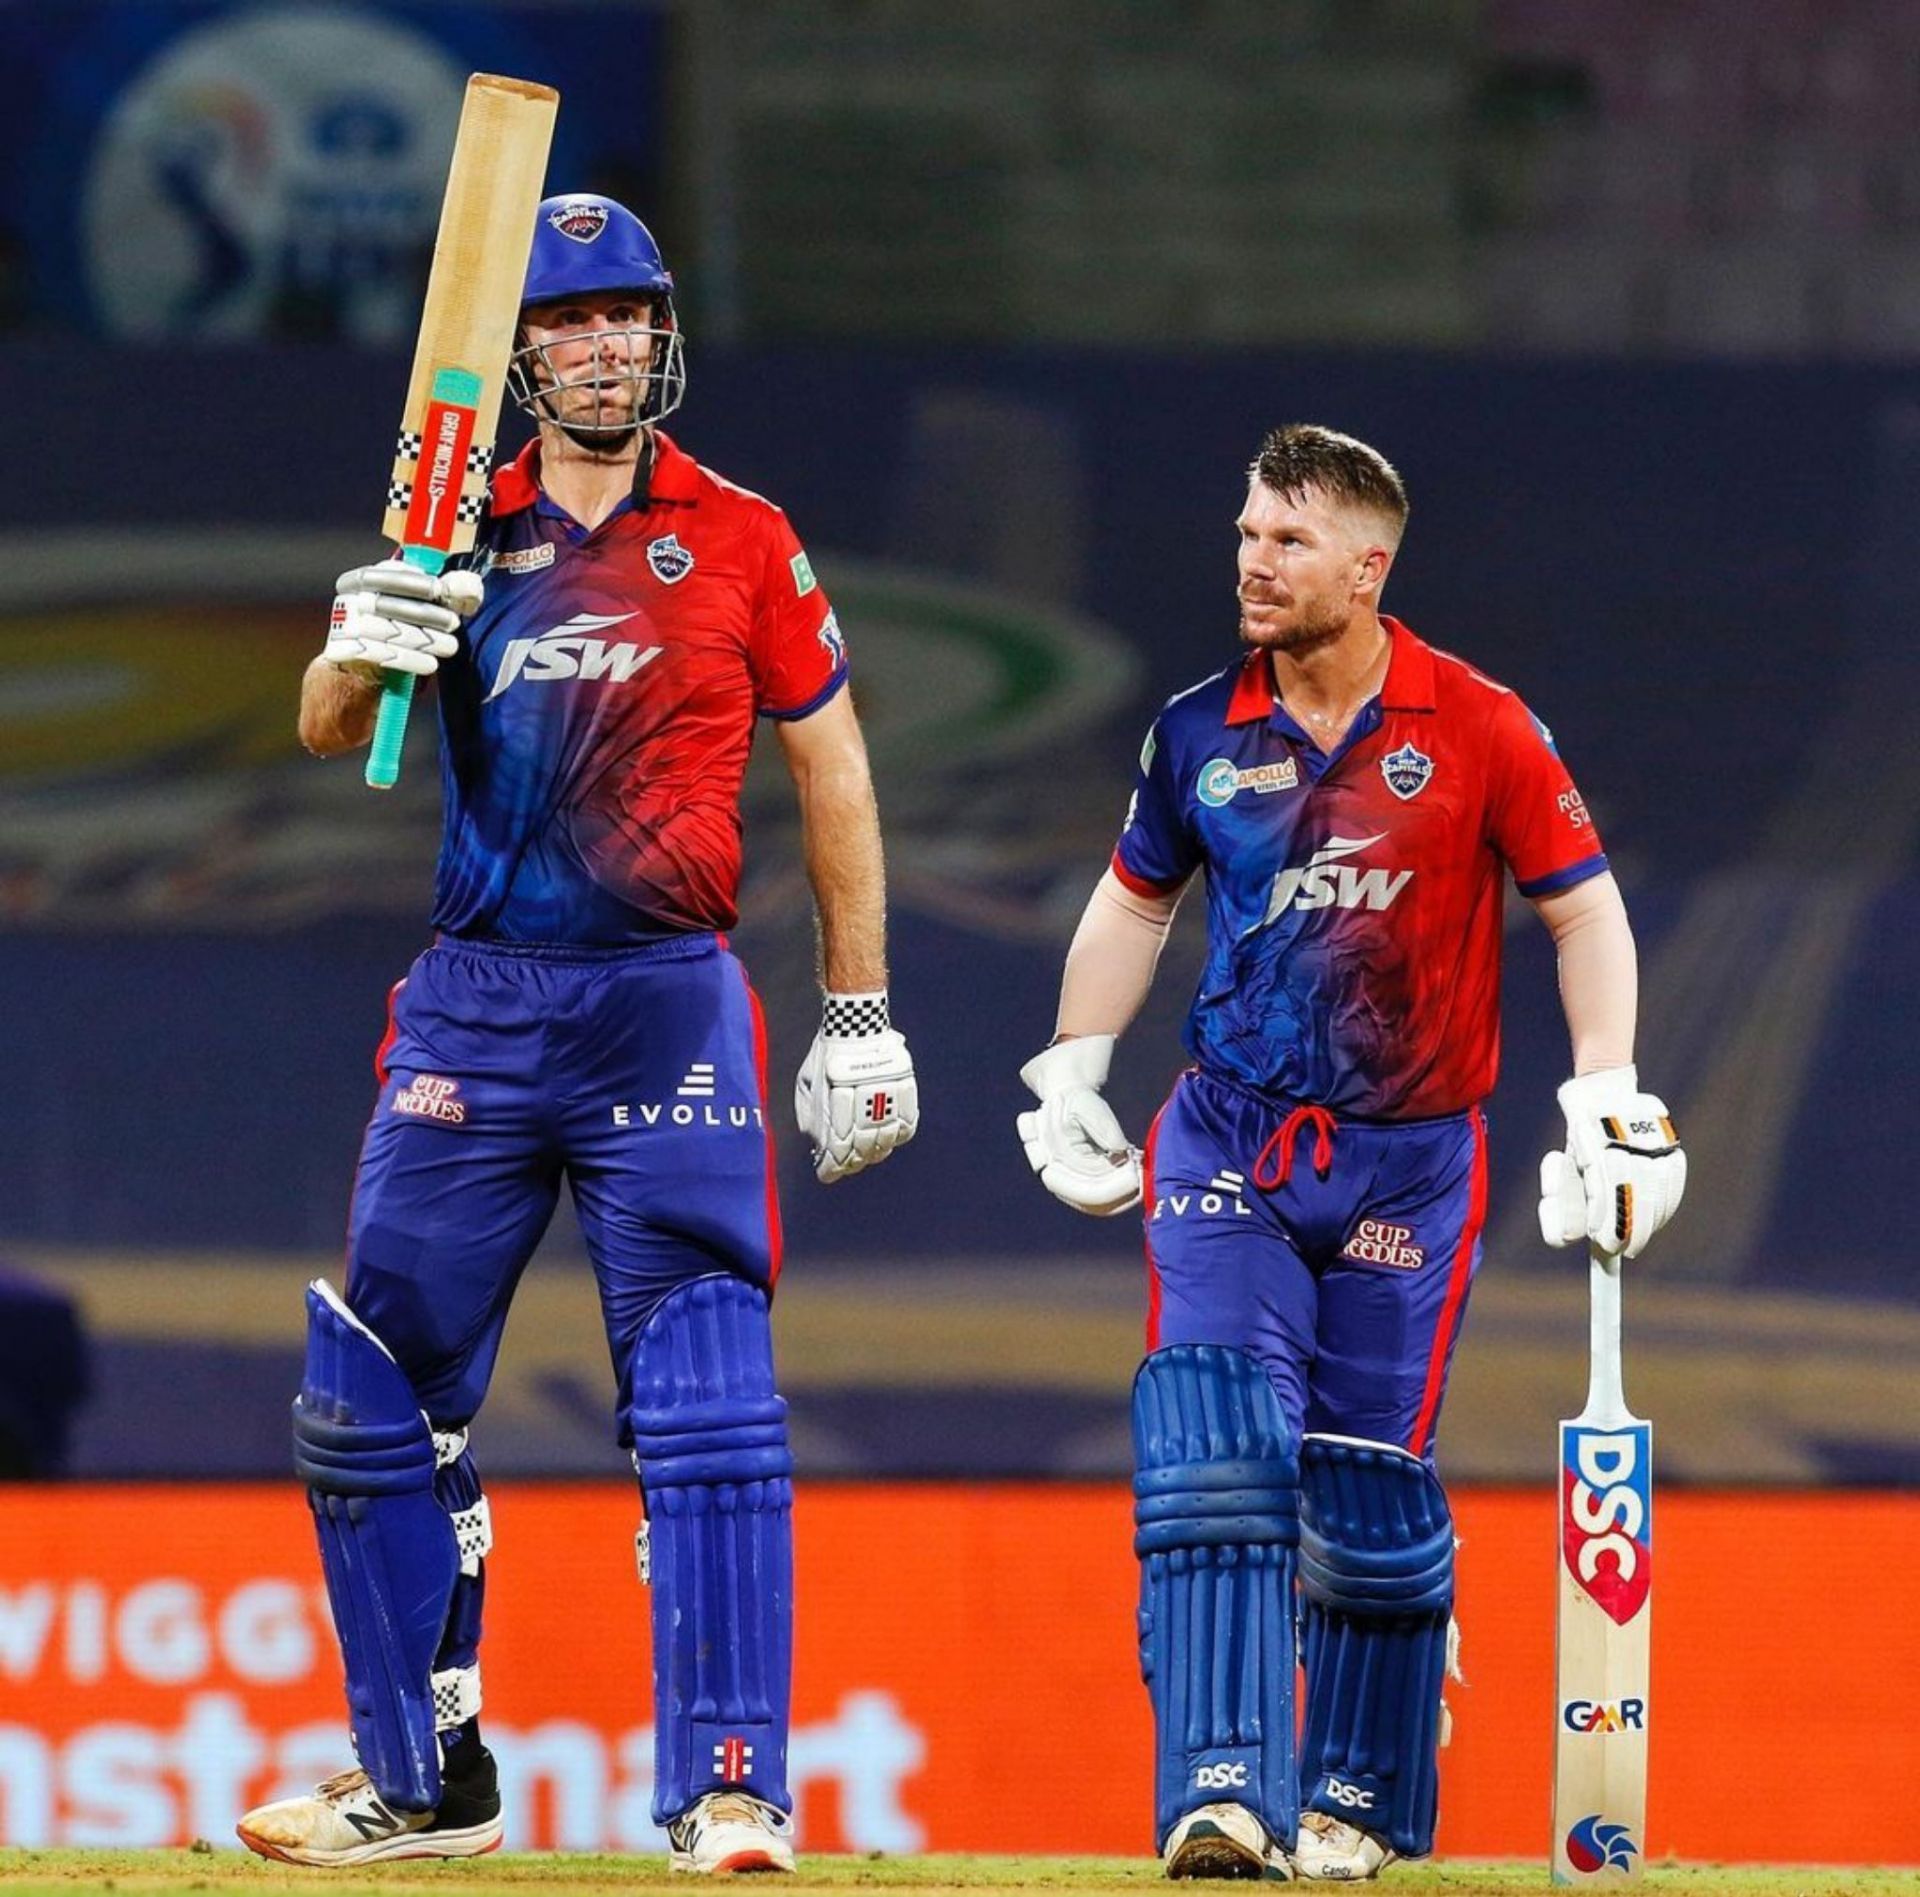 Mitchell Marsh (L) and David Warner have been in great touch for the Delhi Capitals (Image courtesy: iplt20.com)